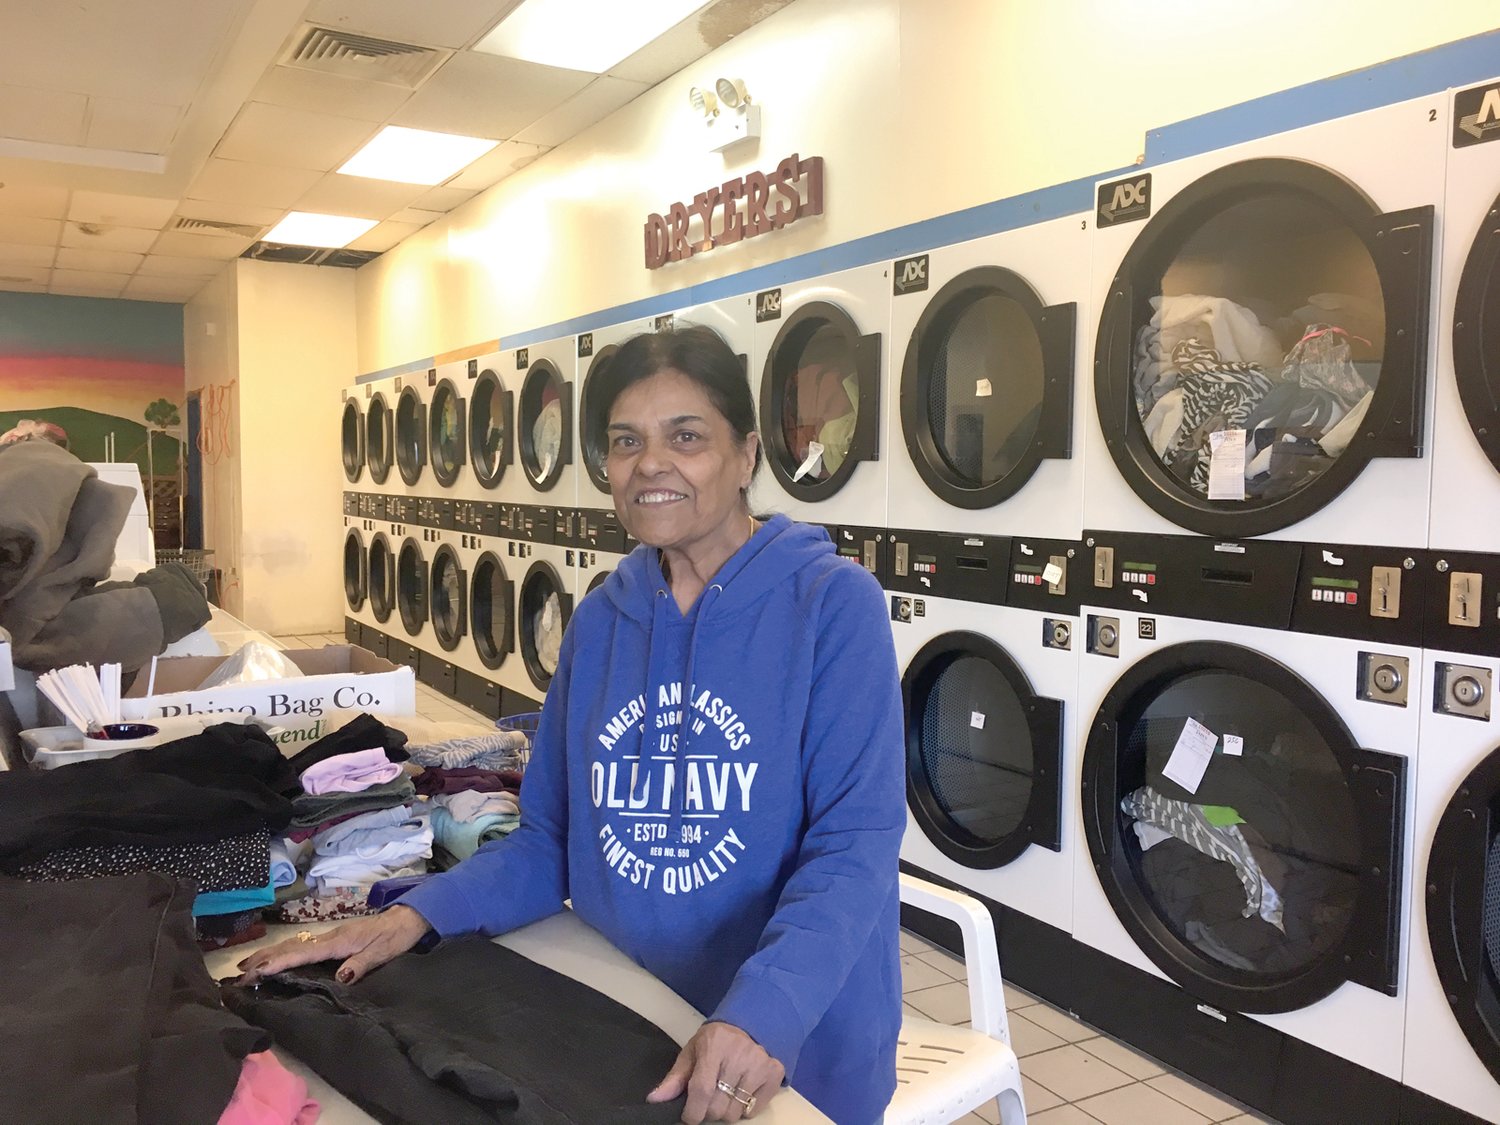 Kaushal Jain is a steady and familiar face at Jain’s Laundry, the family-owned business that she and her husband Sripal have operated for over twenty-nine years